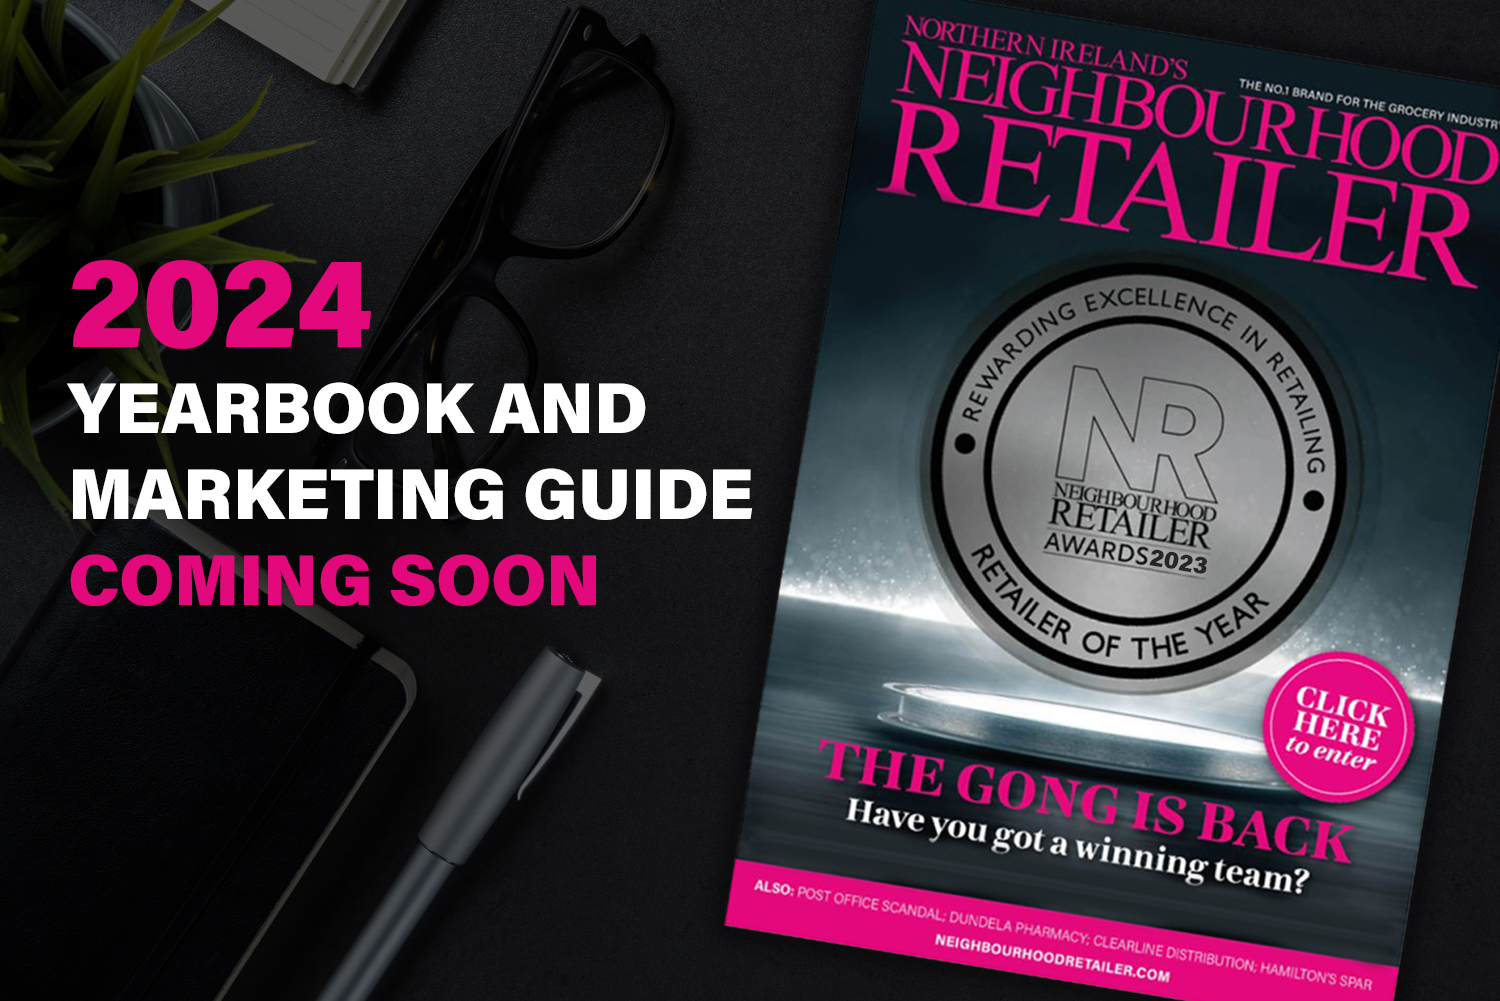 Our showcase edition – the 2024 Yearbook and Marketing Guide coming soon!